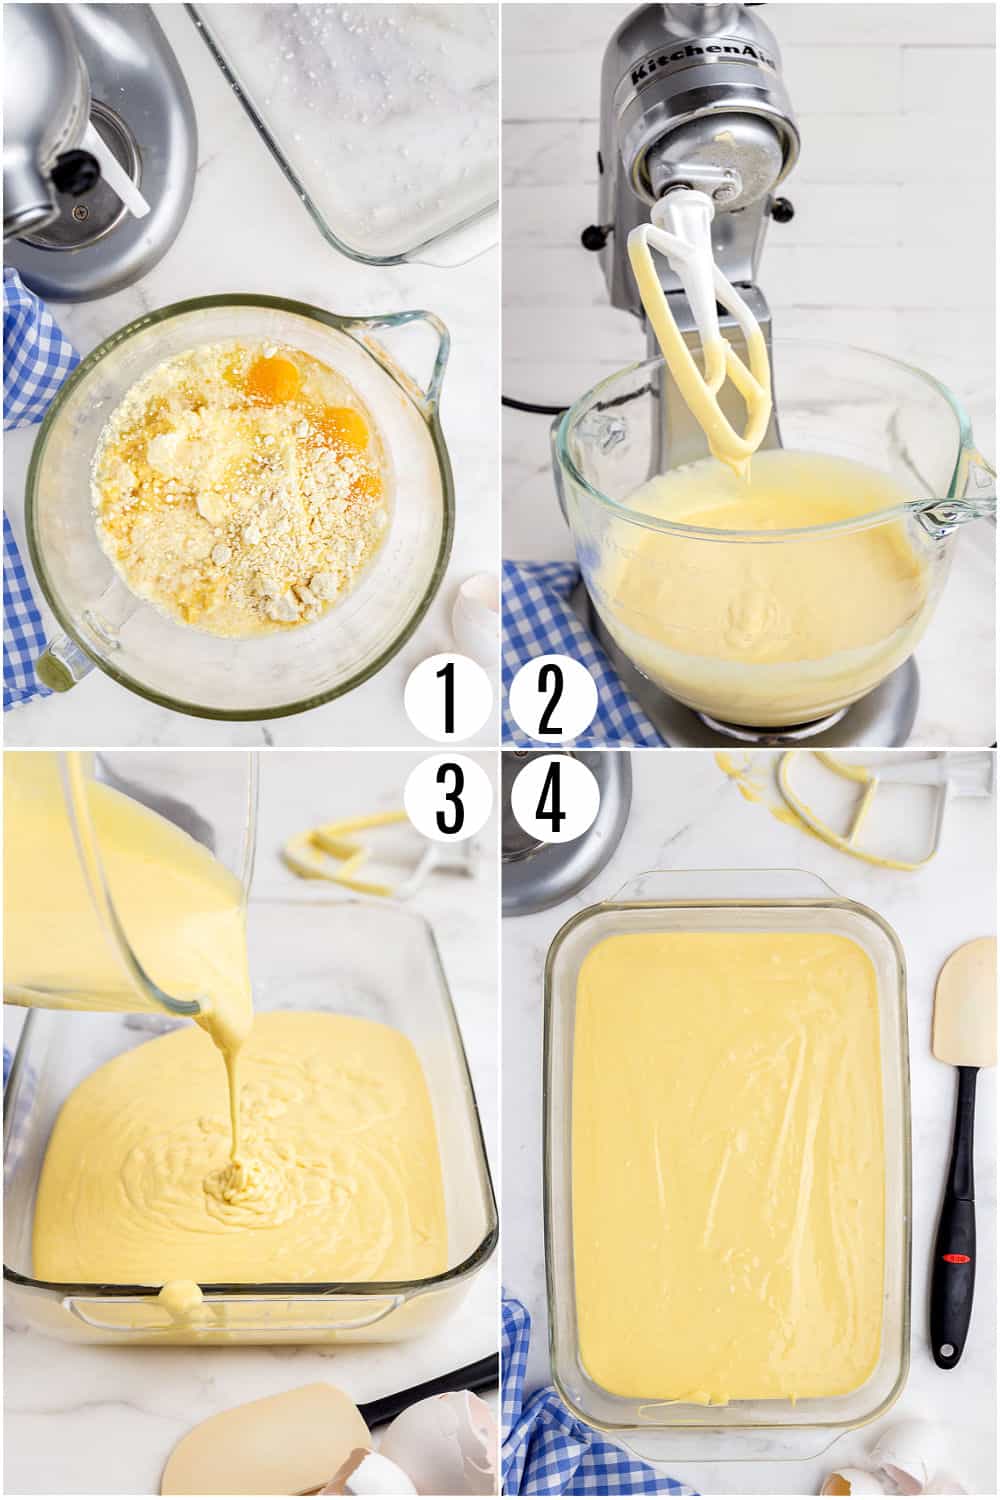 Step by step photos showing how to make lemon poke cake.